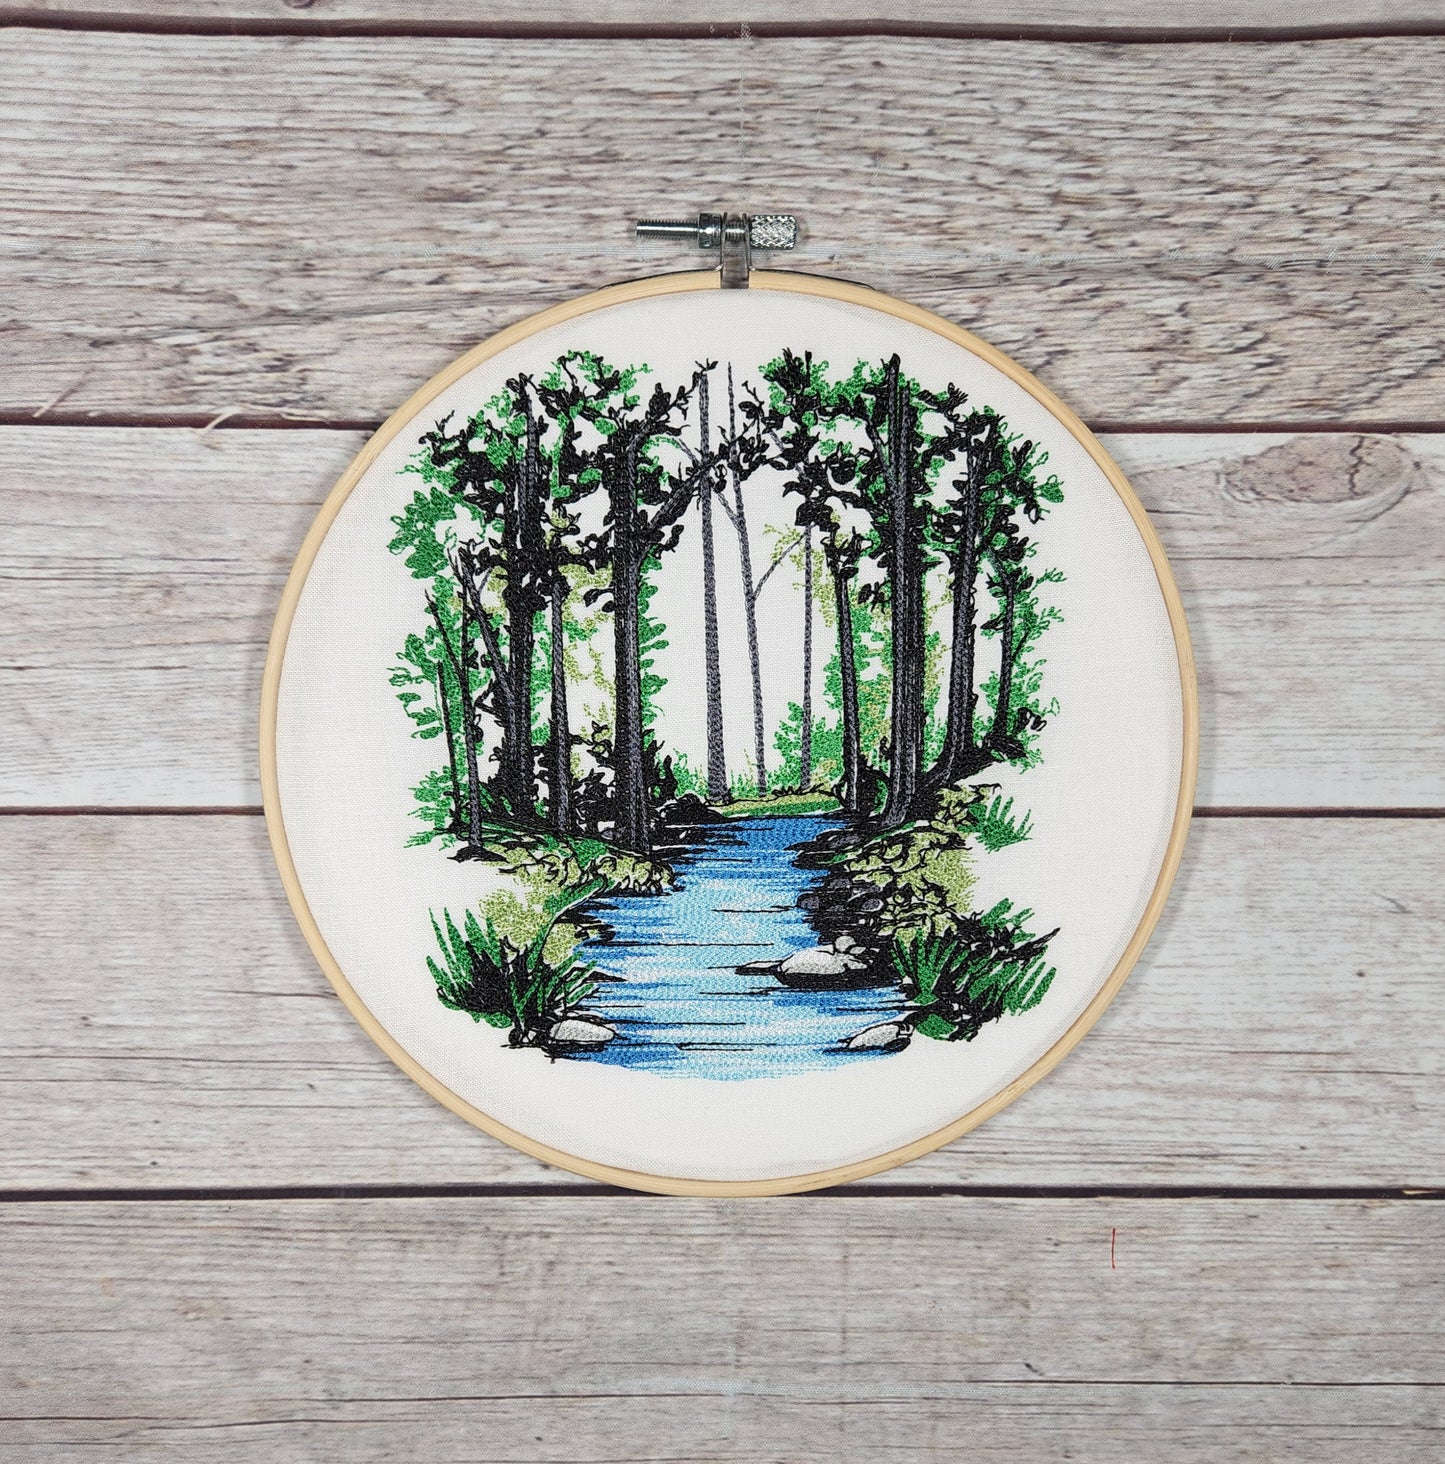 Embroidered Wall Art, 8 inch hoop Embroidery, Nature Hoop – Full